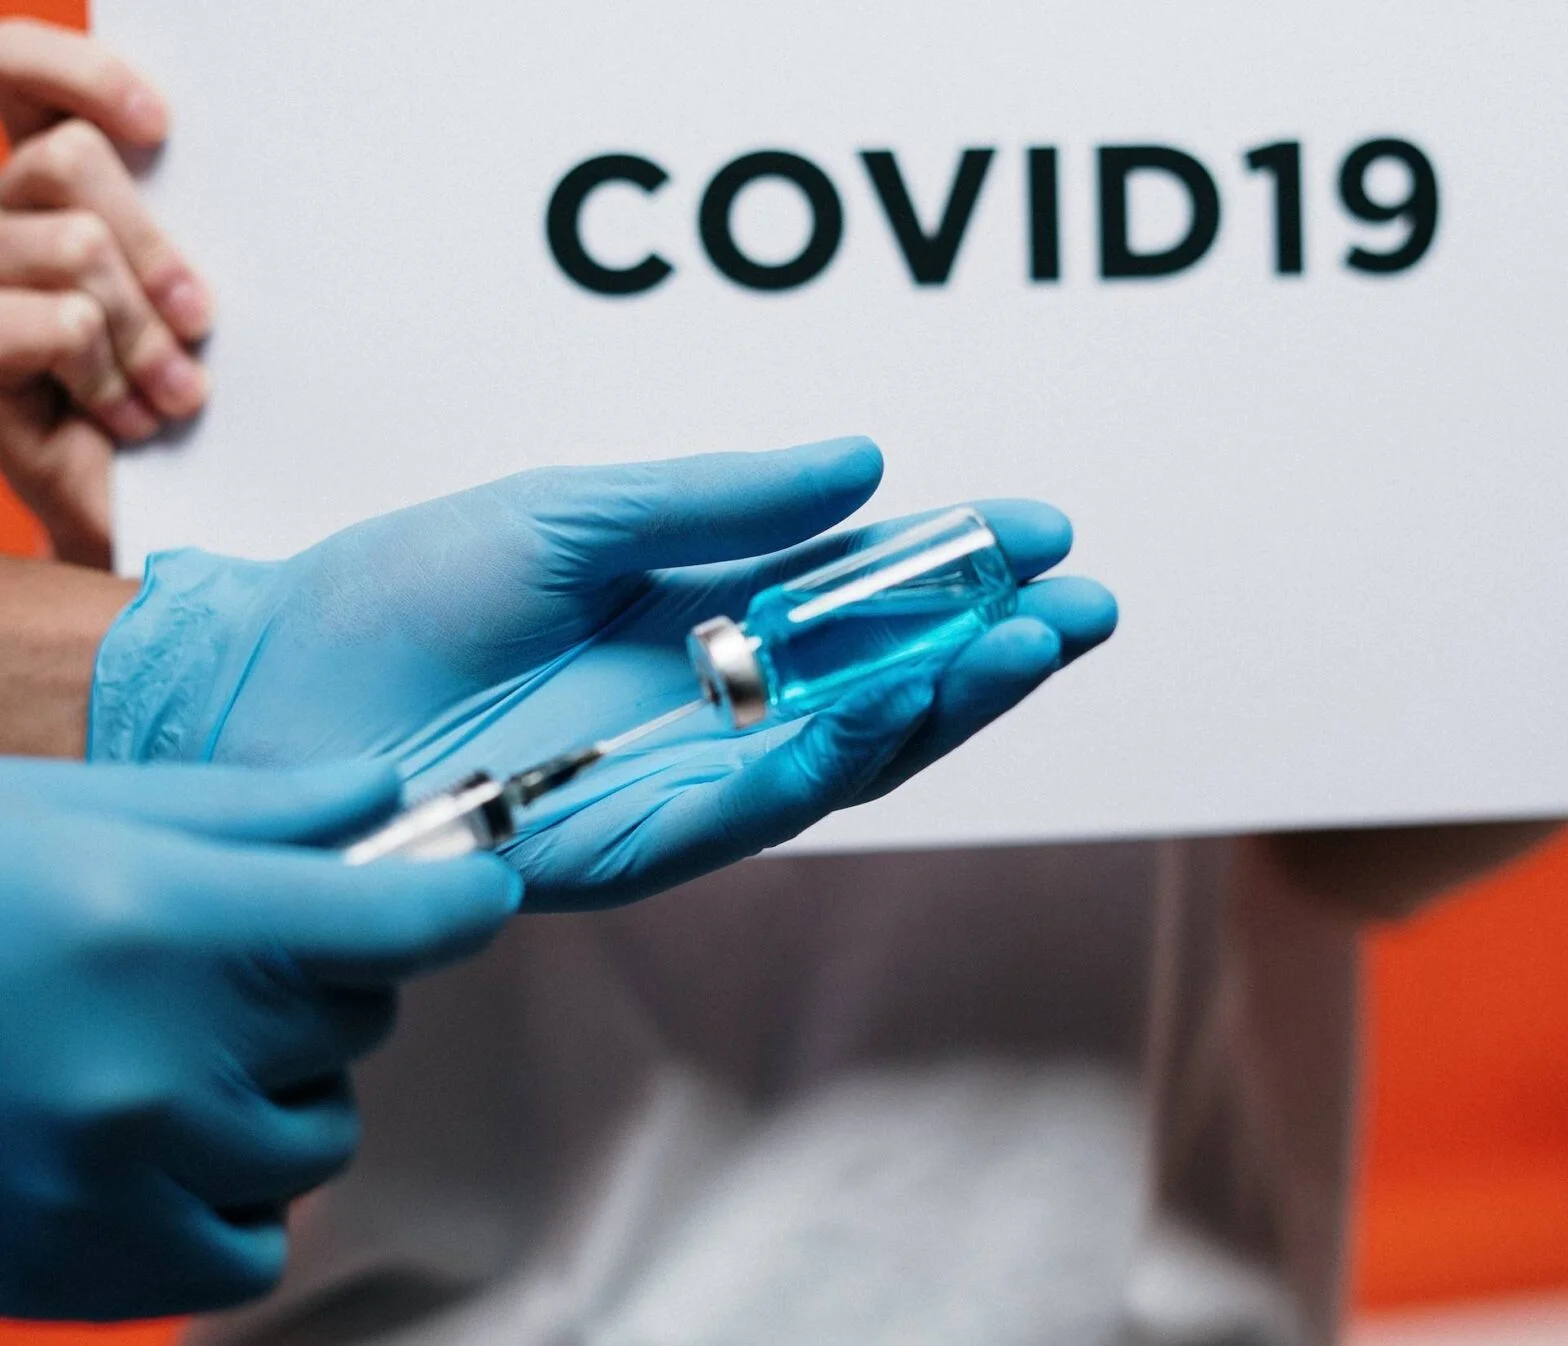 Understanding the Science Behind the Covid-19 Vaccine